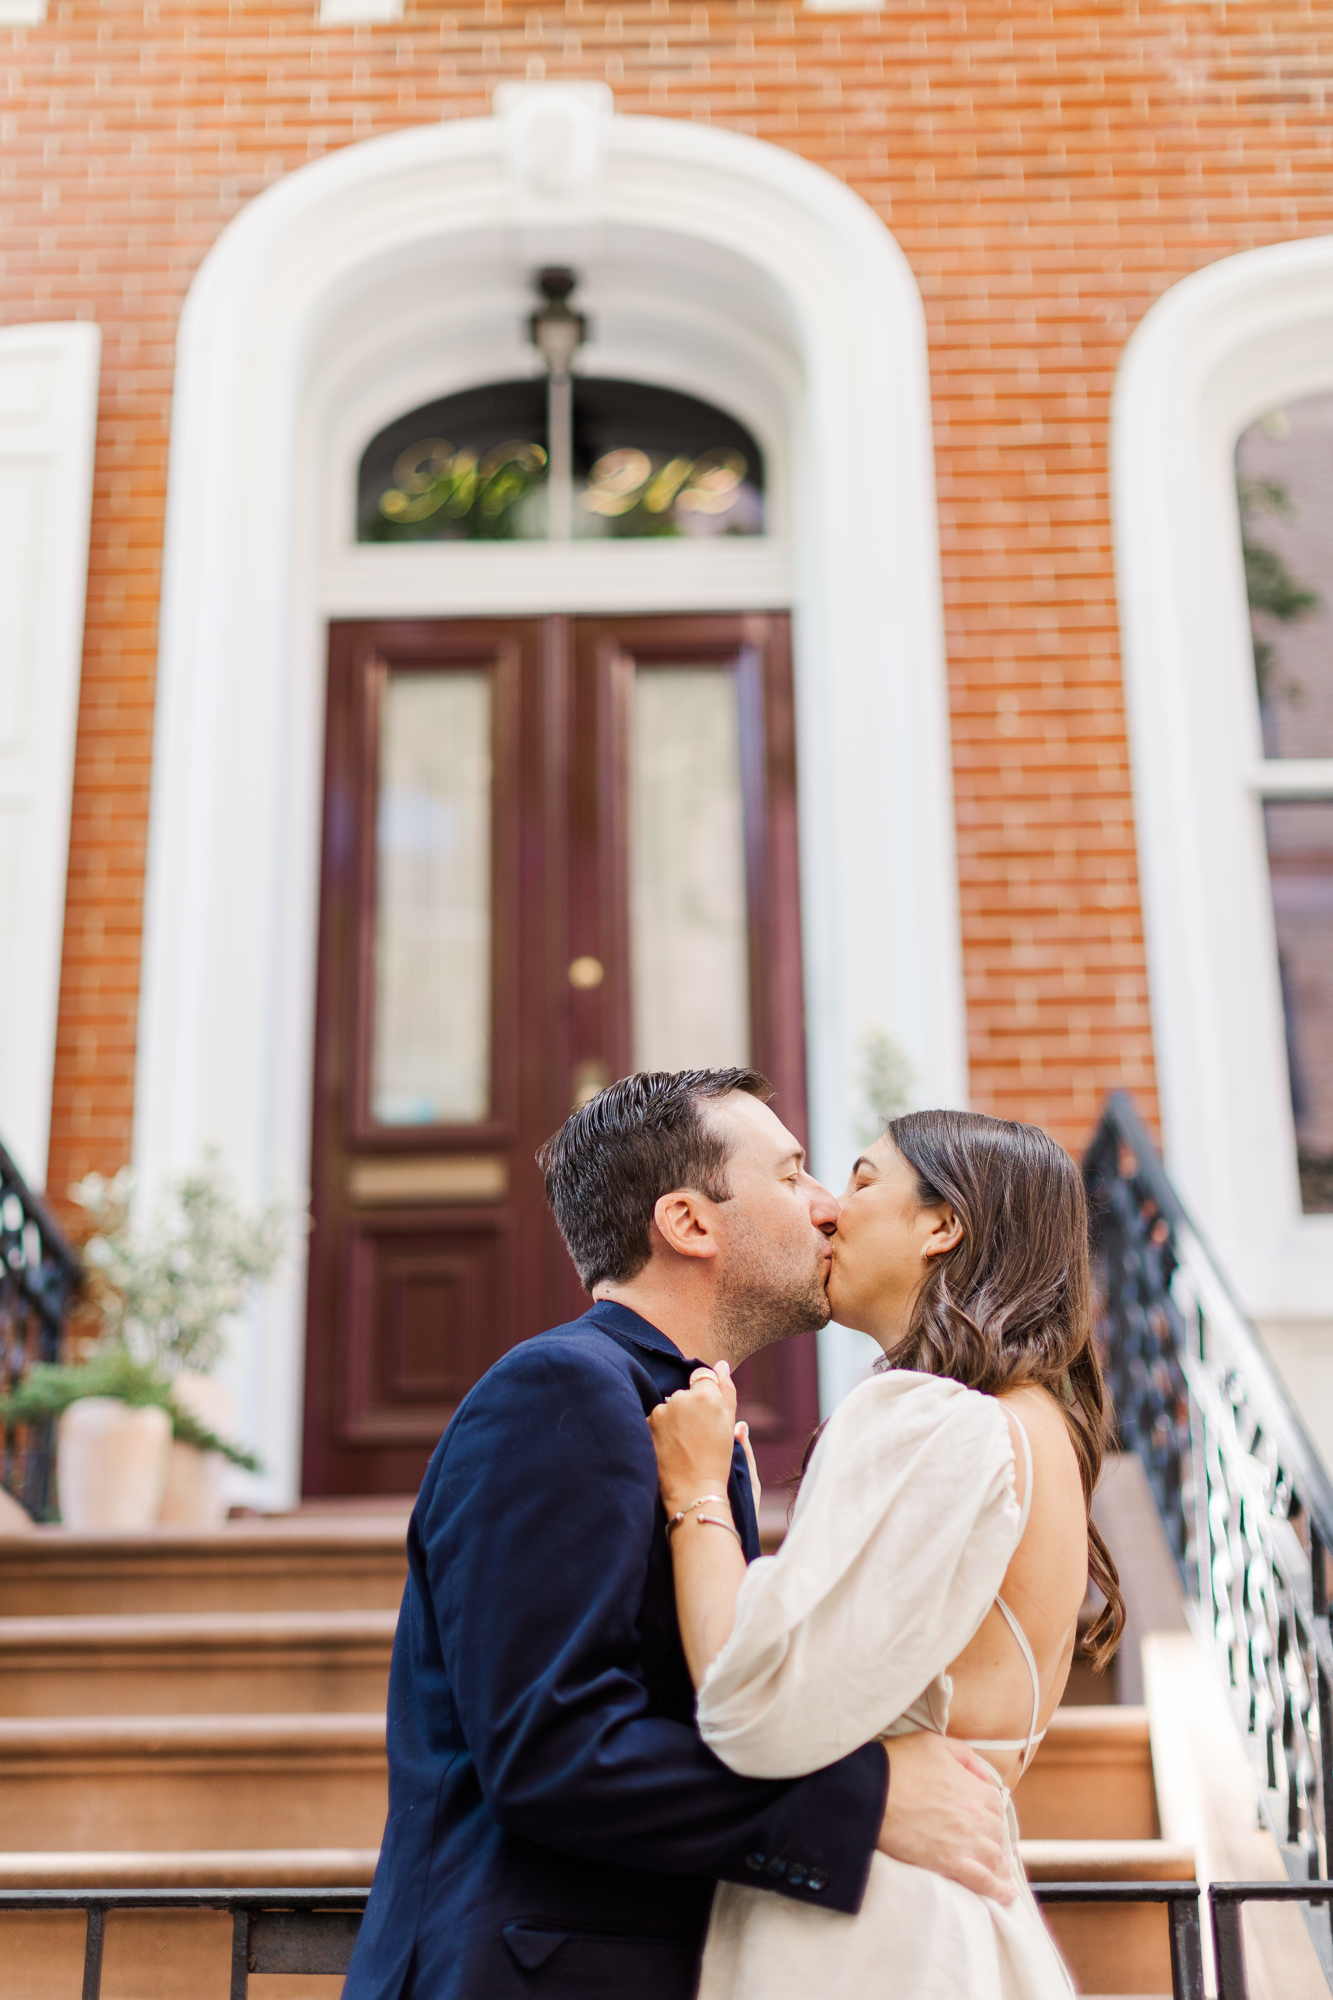 Cheerful Engagement Photos In Upper East Side